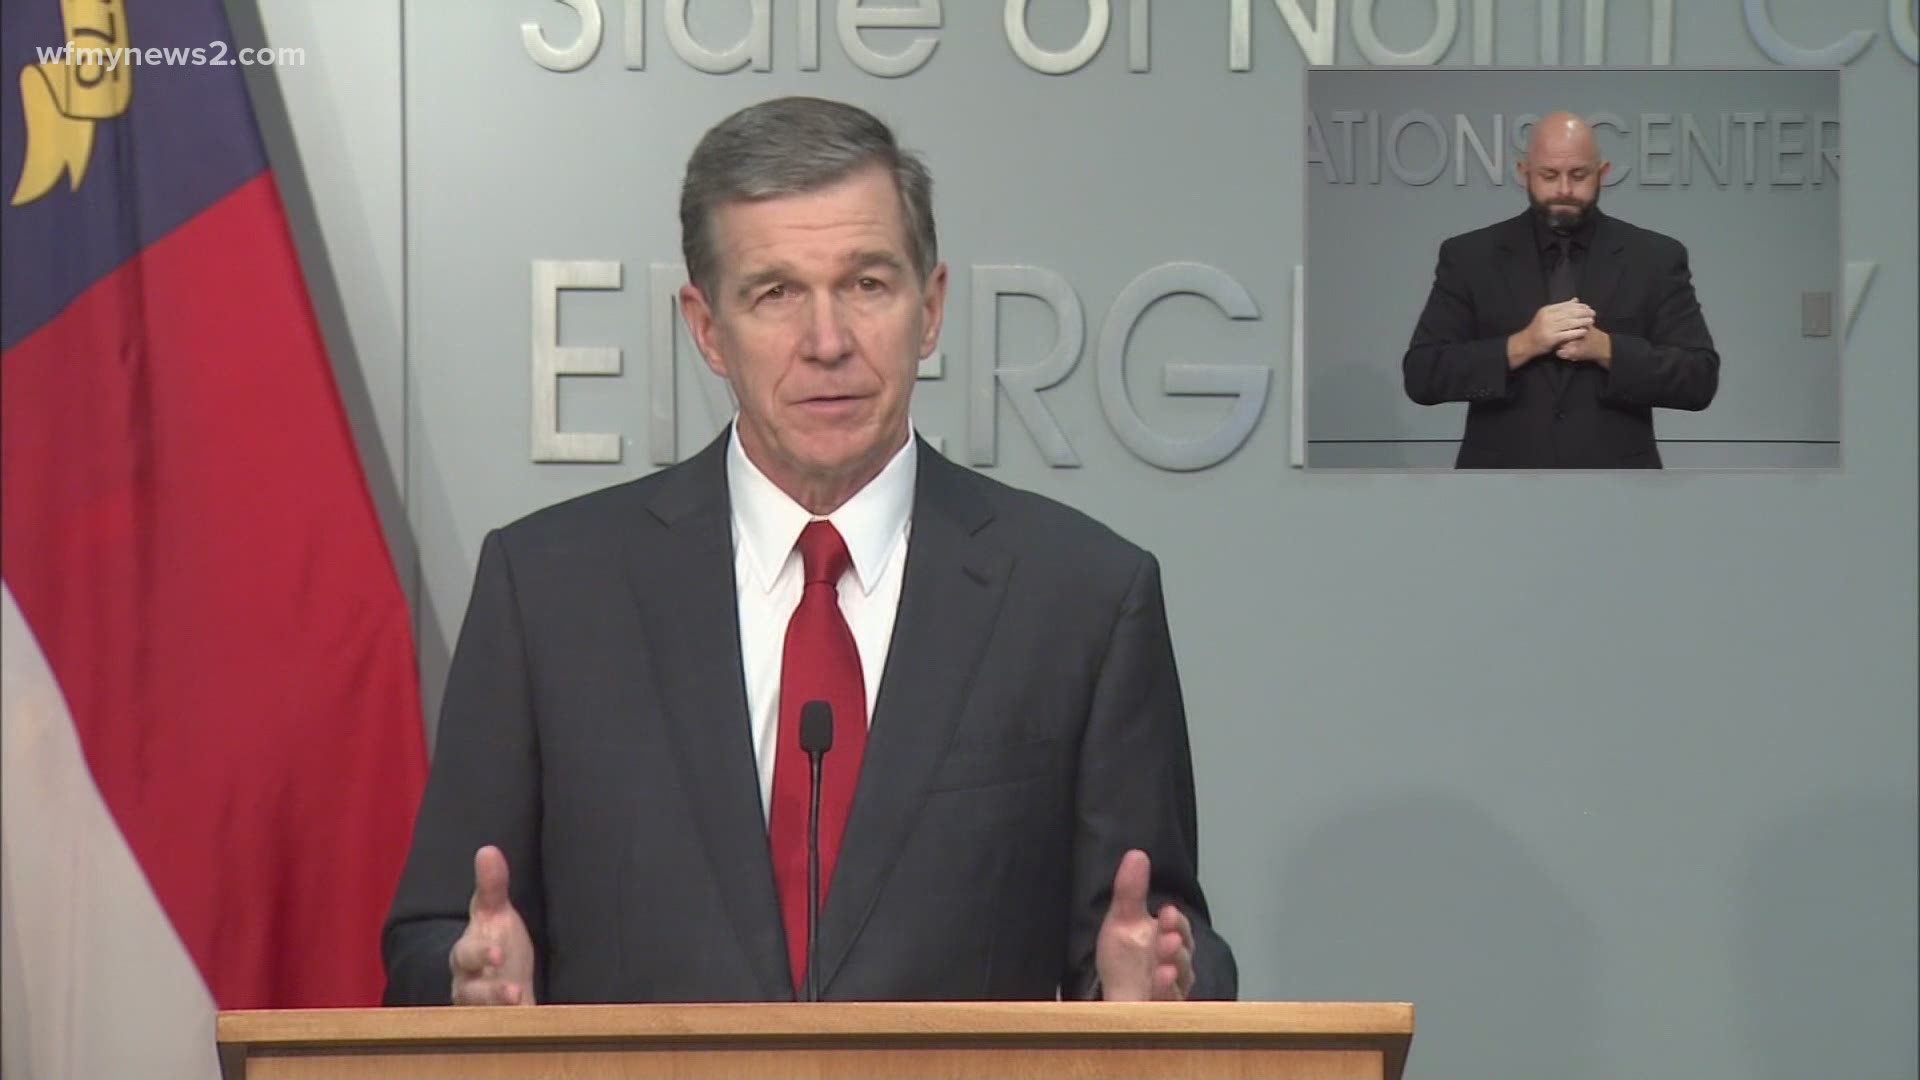 Gov. Roy Cooper announced North Carolina can move into a new Safer at Home phase. Under the phase, museums, aquariums, gyms and bowling alleys can reopen.